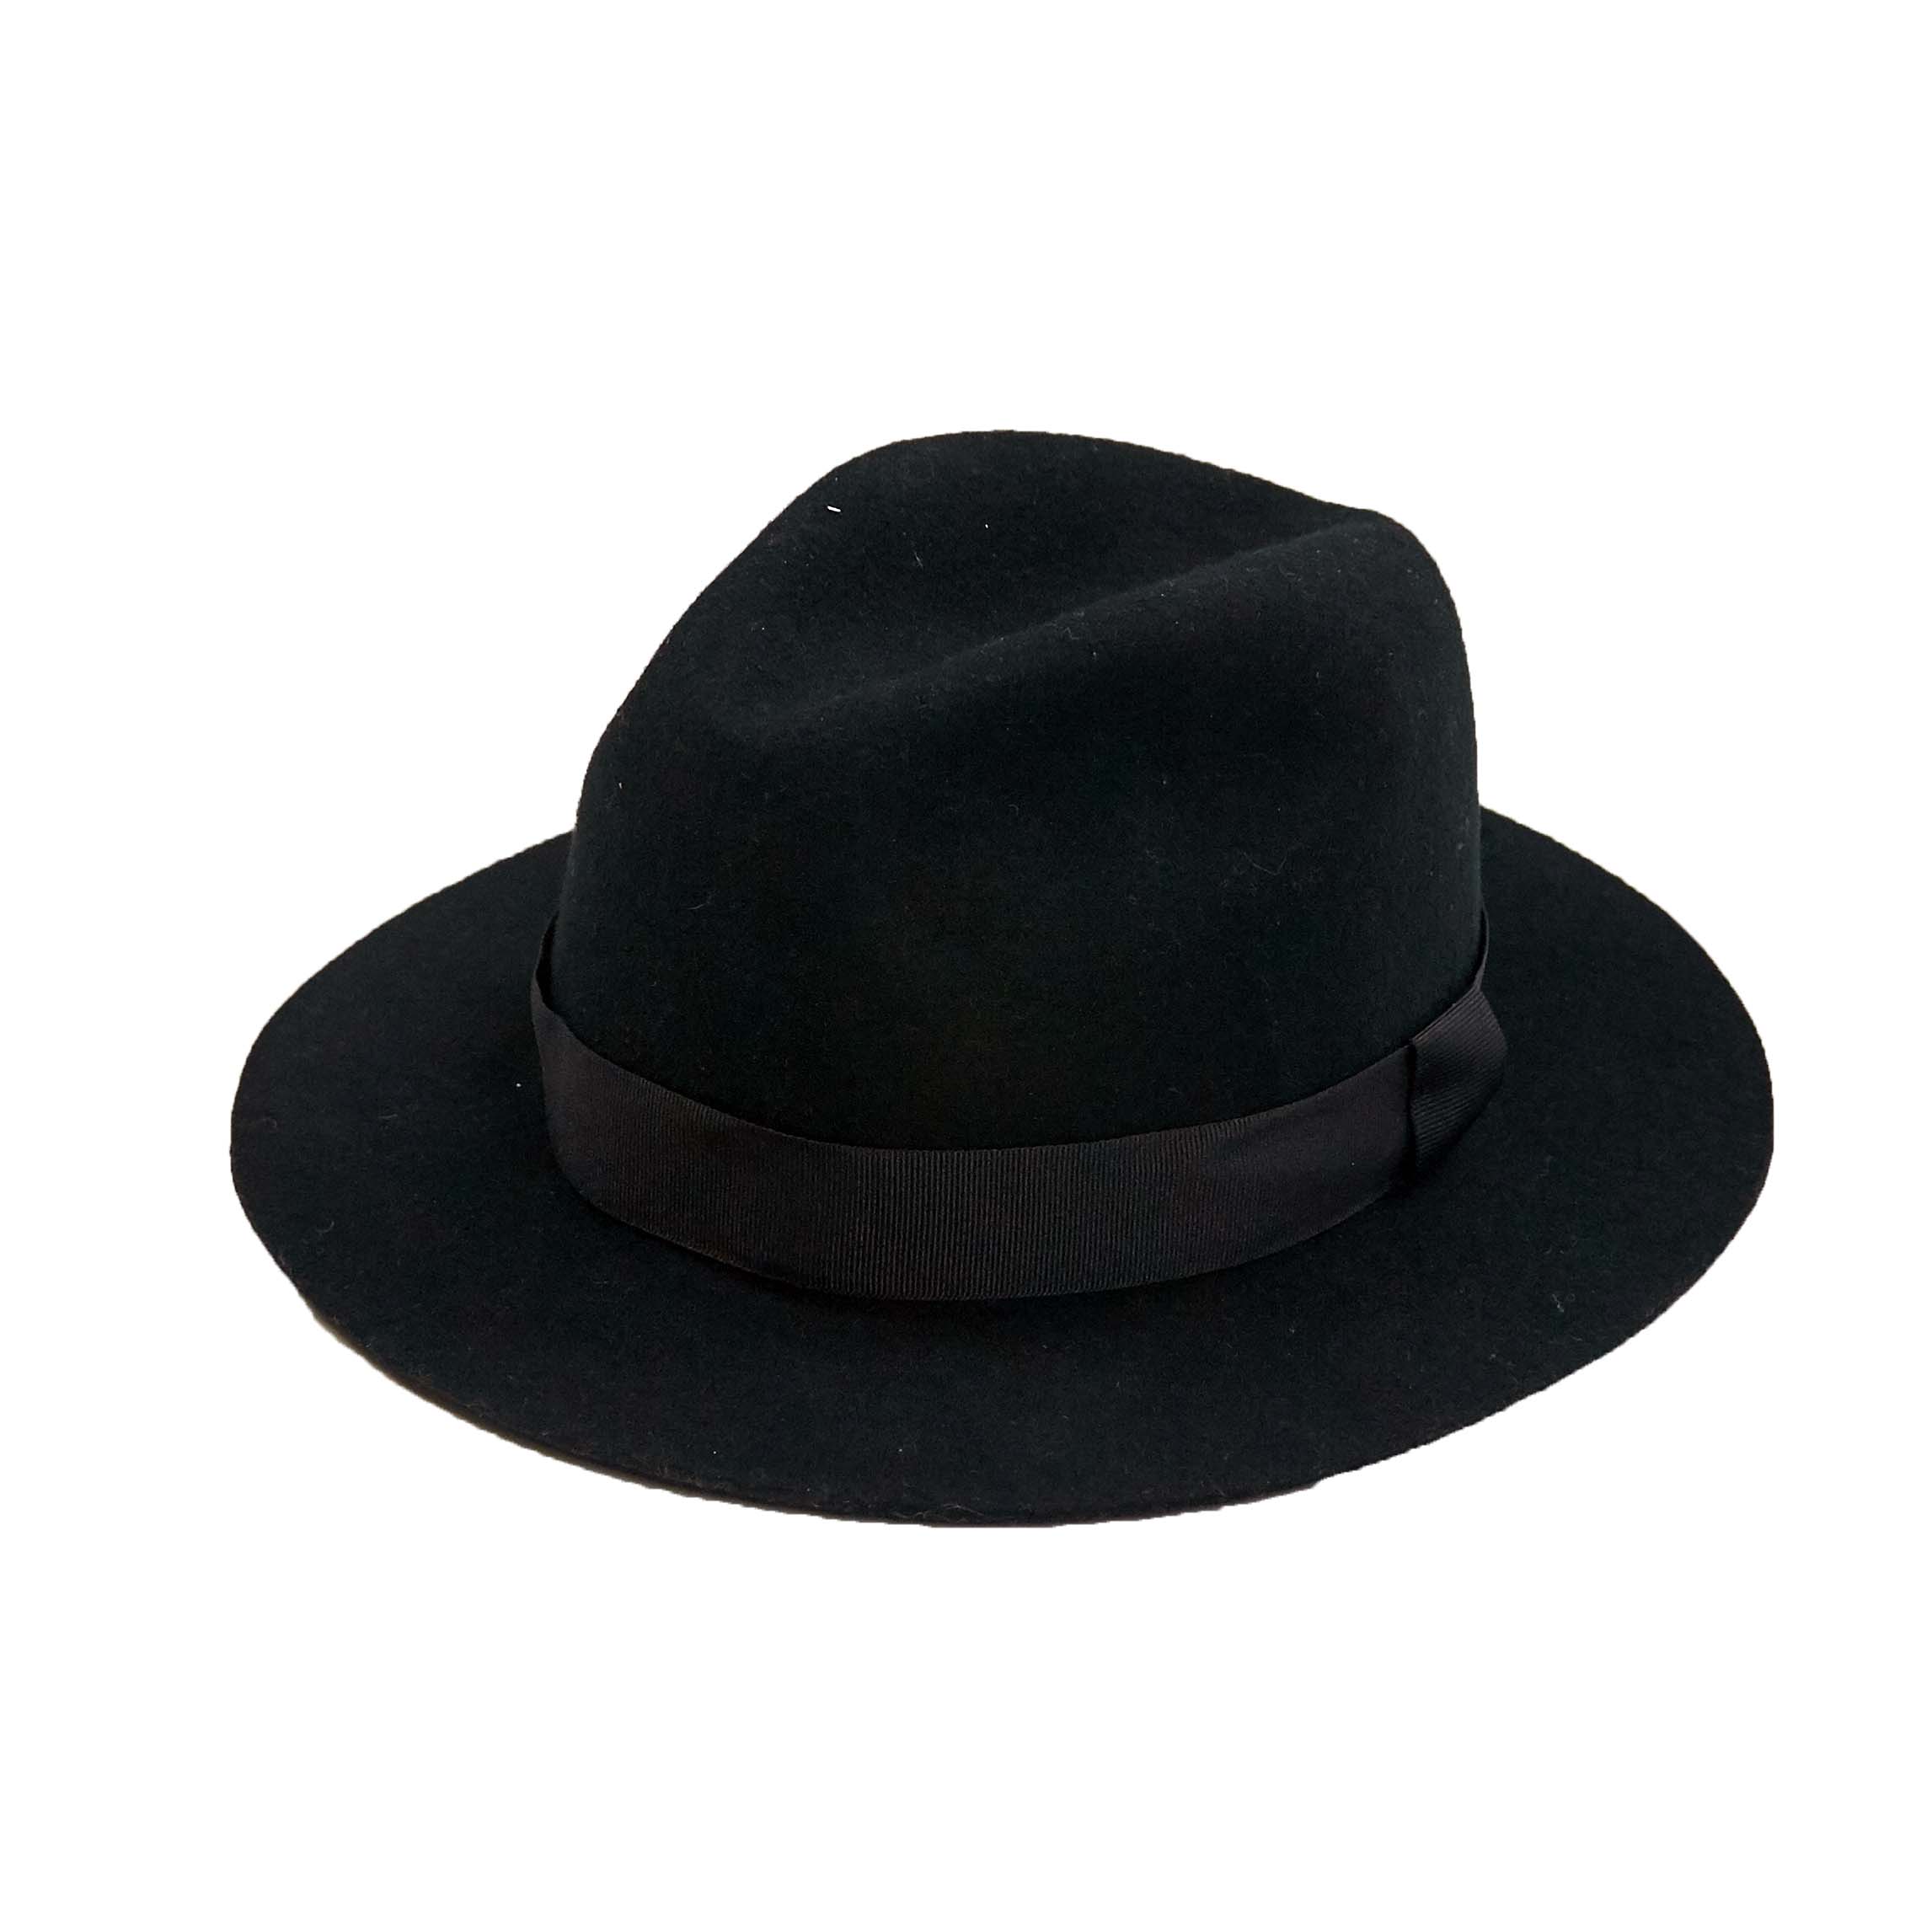 Round black hat | Forever Classic Apparel Co.